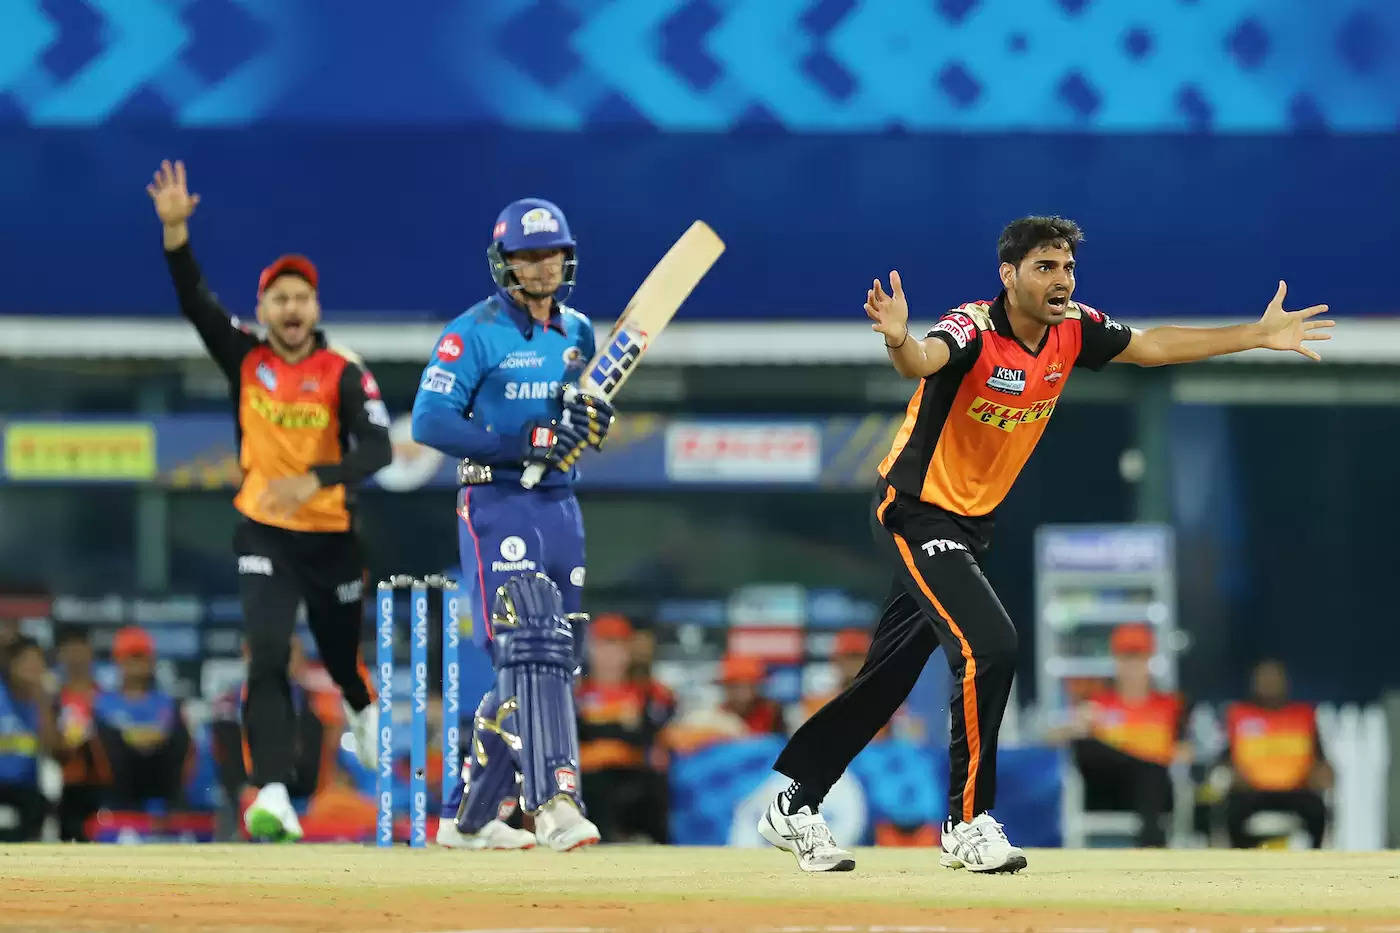 Where to Watch IPL 2021 Live Streaming and TV Details for UAE leg of IPL 2021